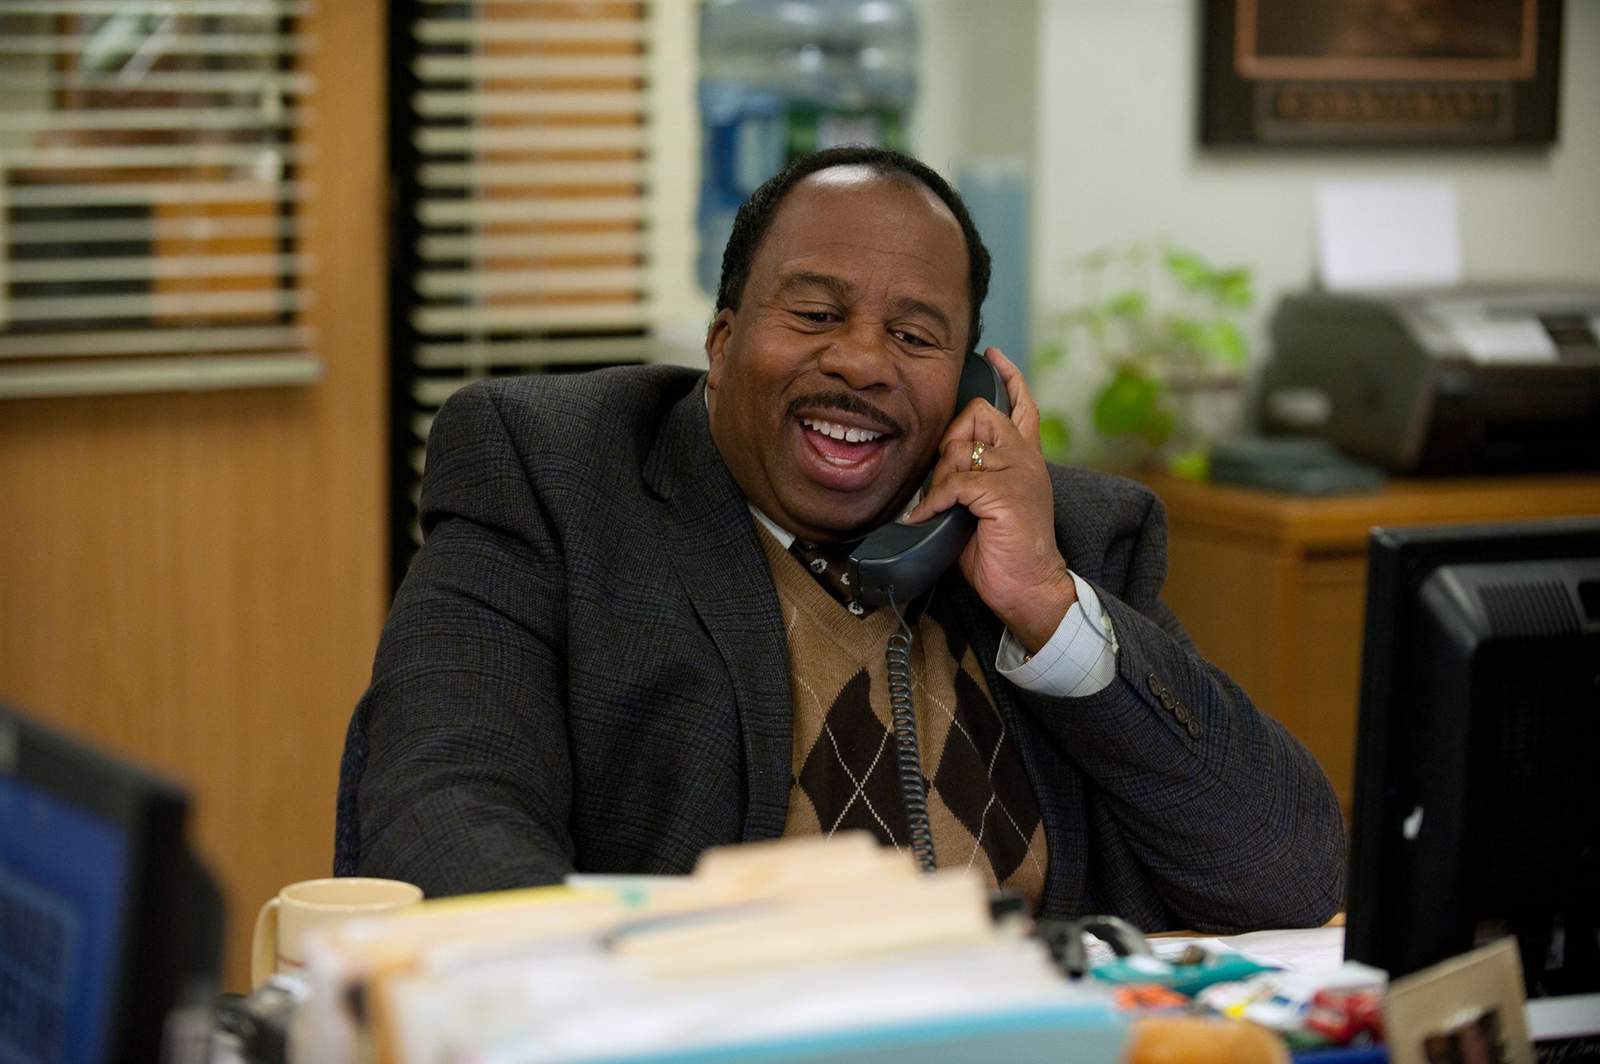 The Offices Leslie David Baker says he received racist abuse after announcing spinoff series